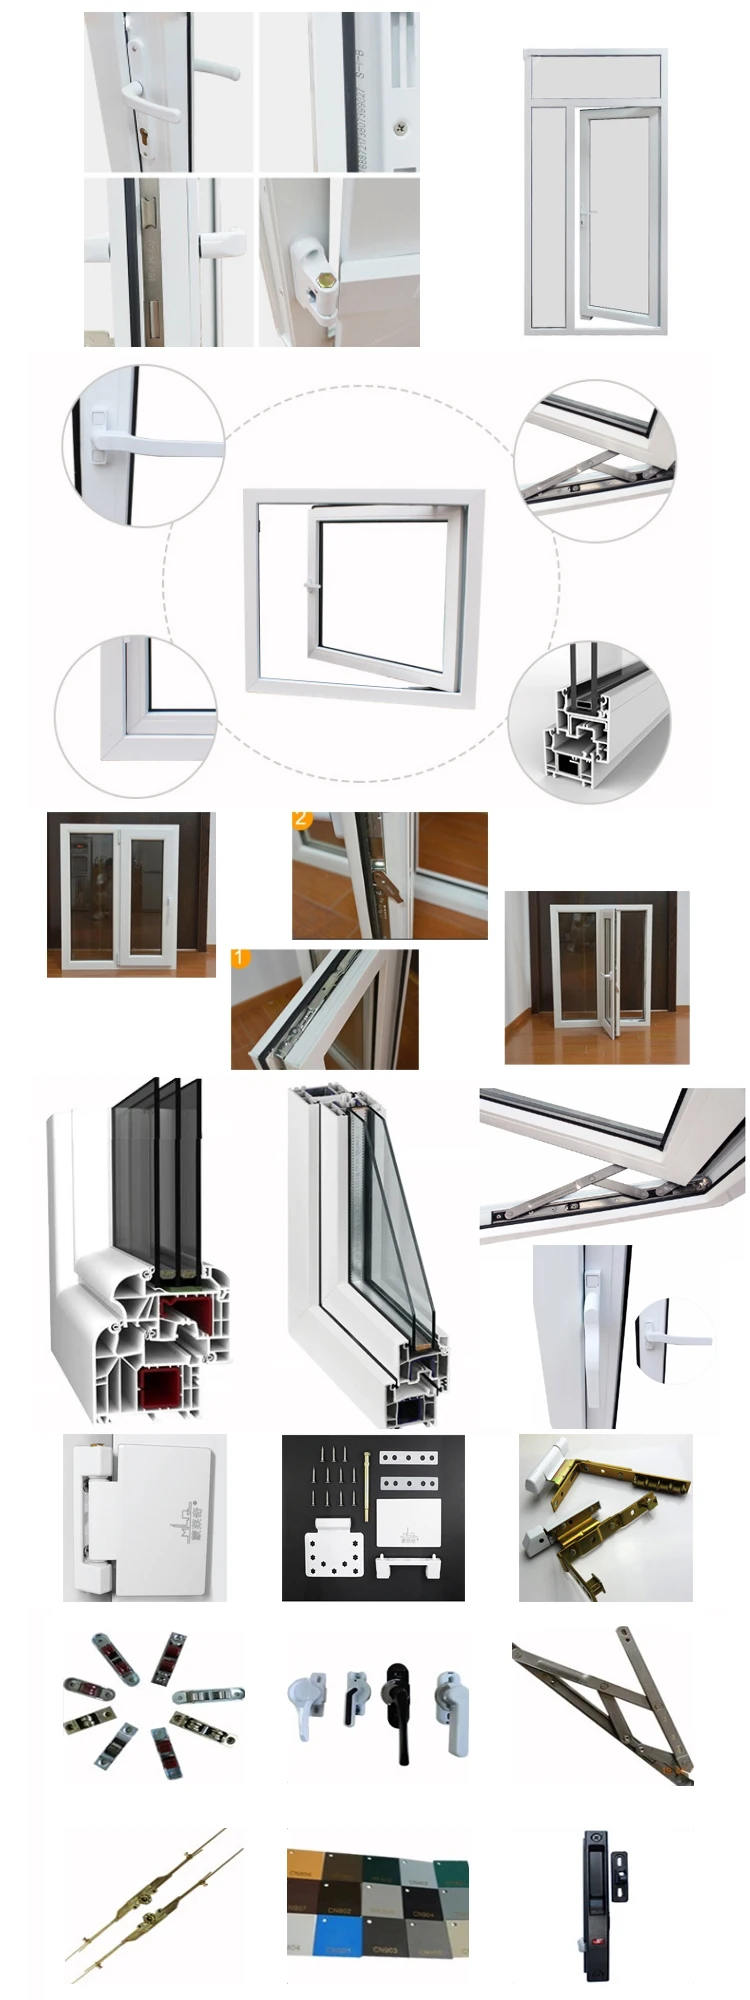 Factory direct price fully glaze upvc door frosted glass exterior doors bathroom with sale